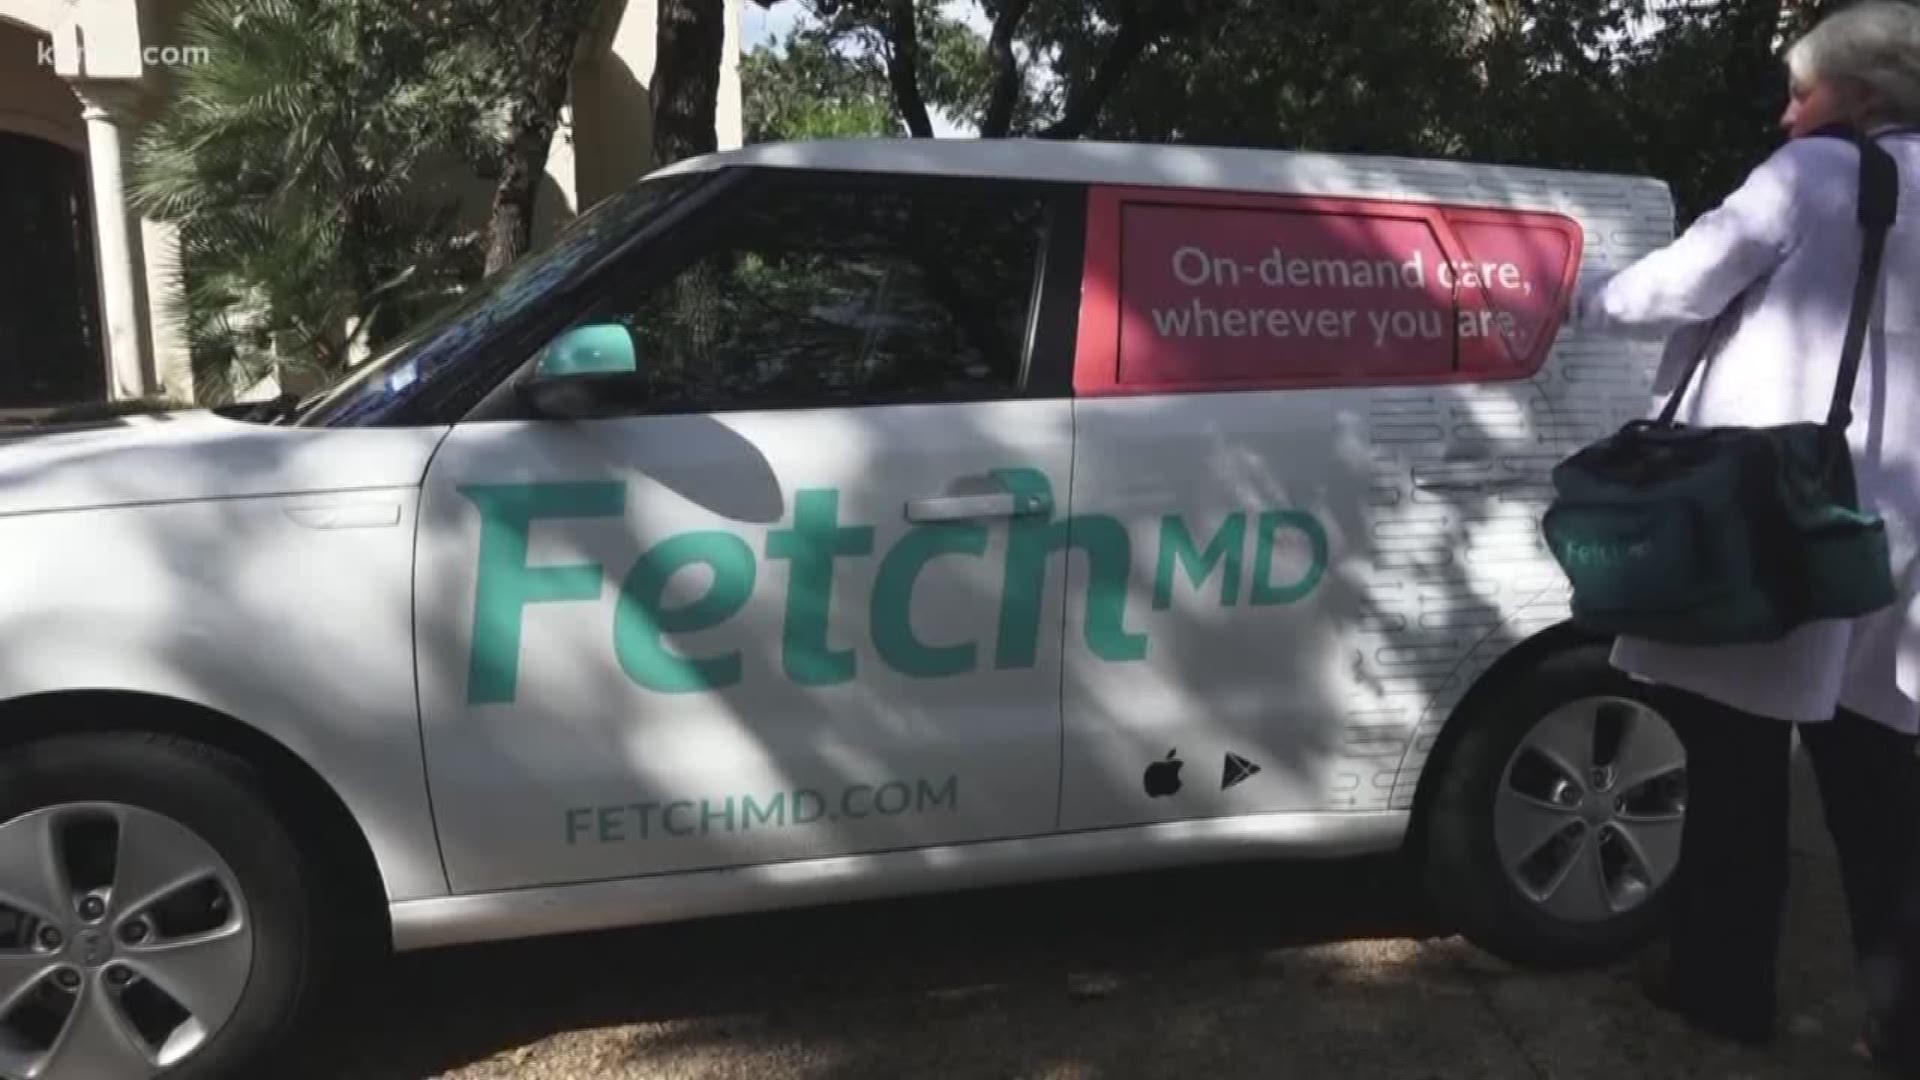 Feeling sick and need a house call? There's an app for that. FetchMD will send a doctor right to your home to help you with your medical needs.